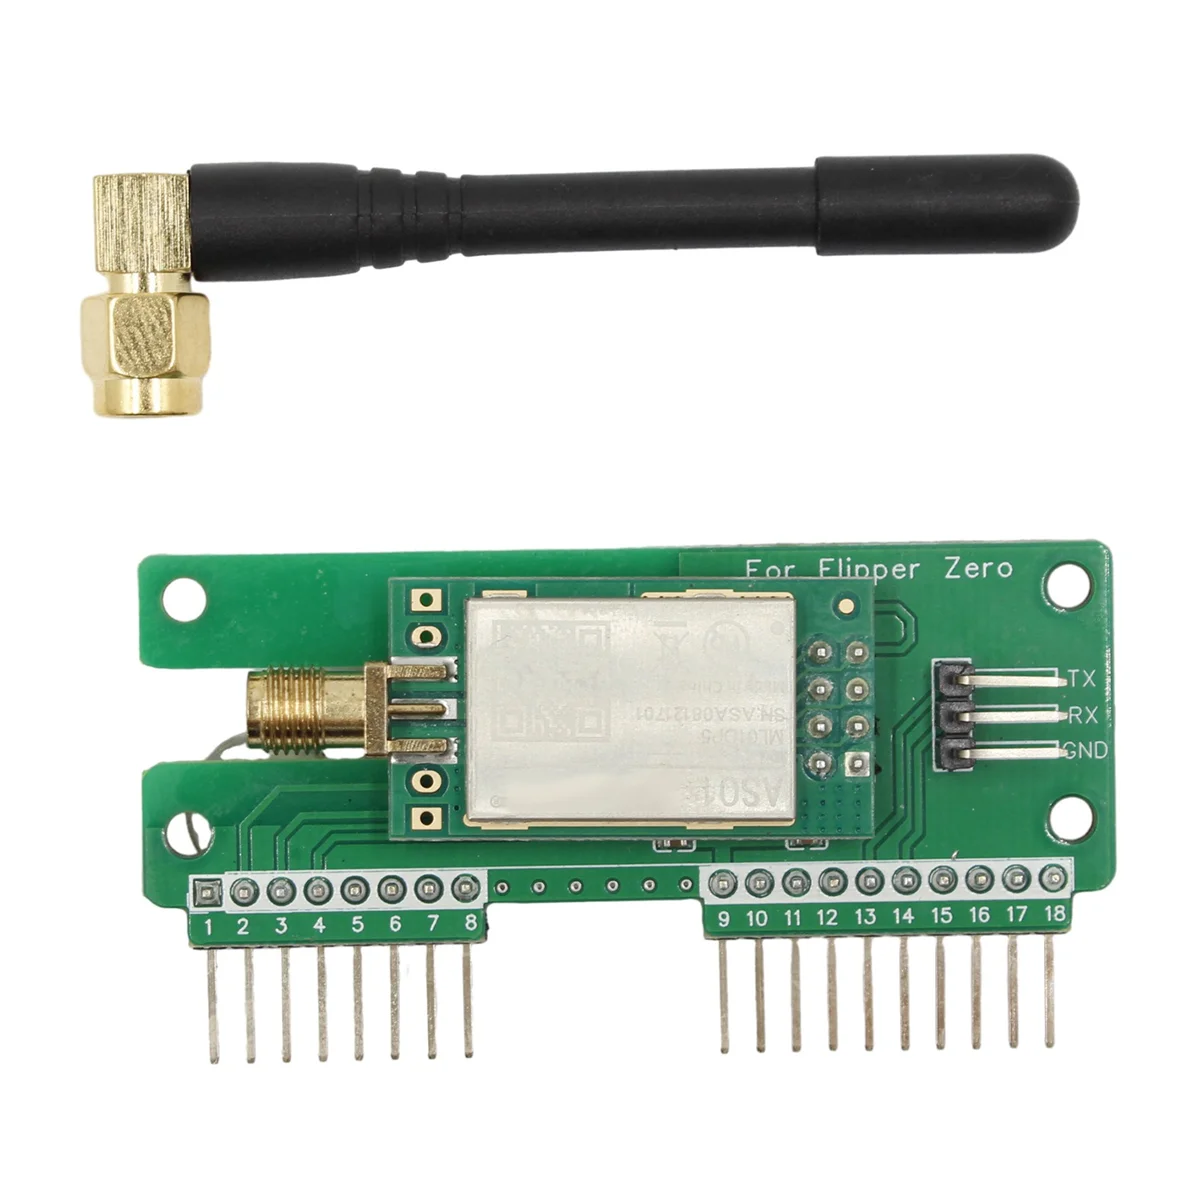 

For Flipper Zero NRF24 Module Improved Version GPIO for Sniffer and Mouse Jacker